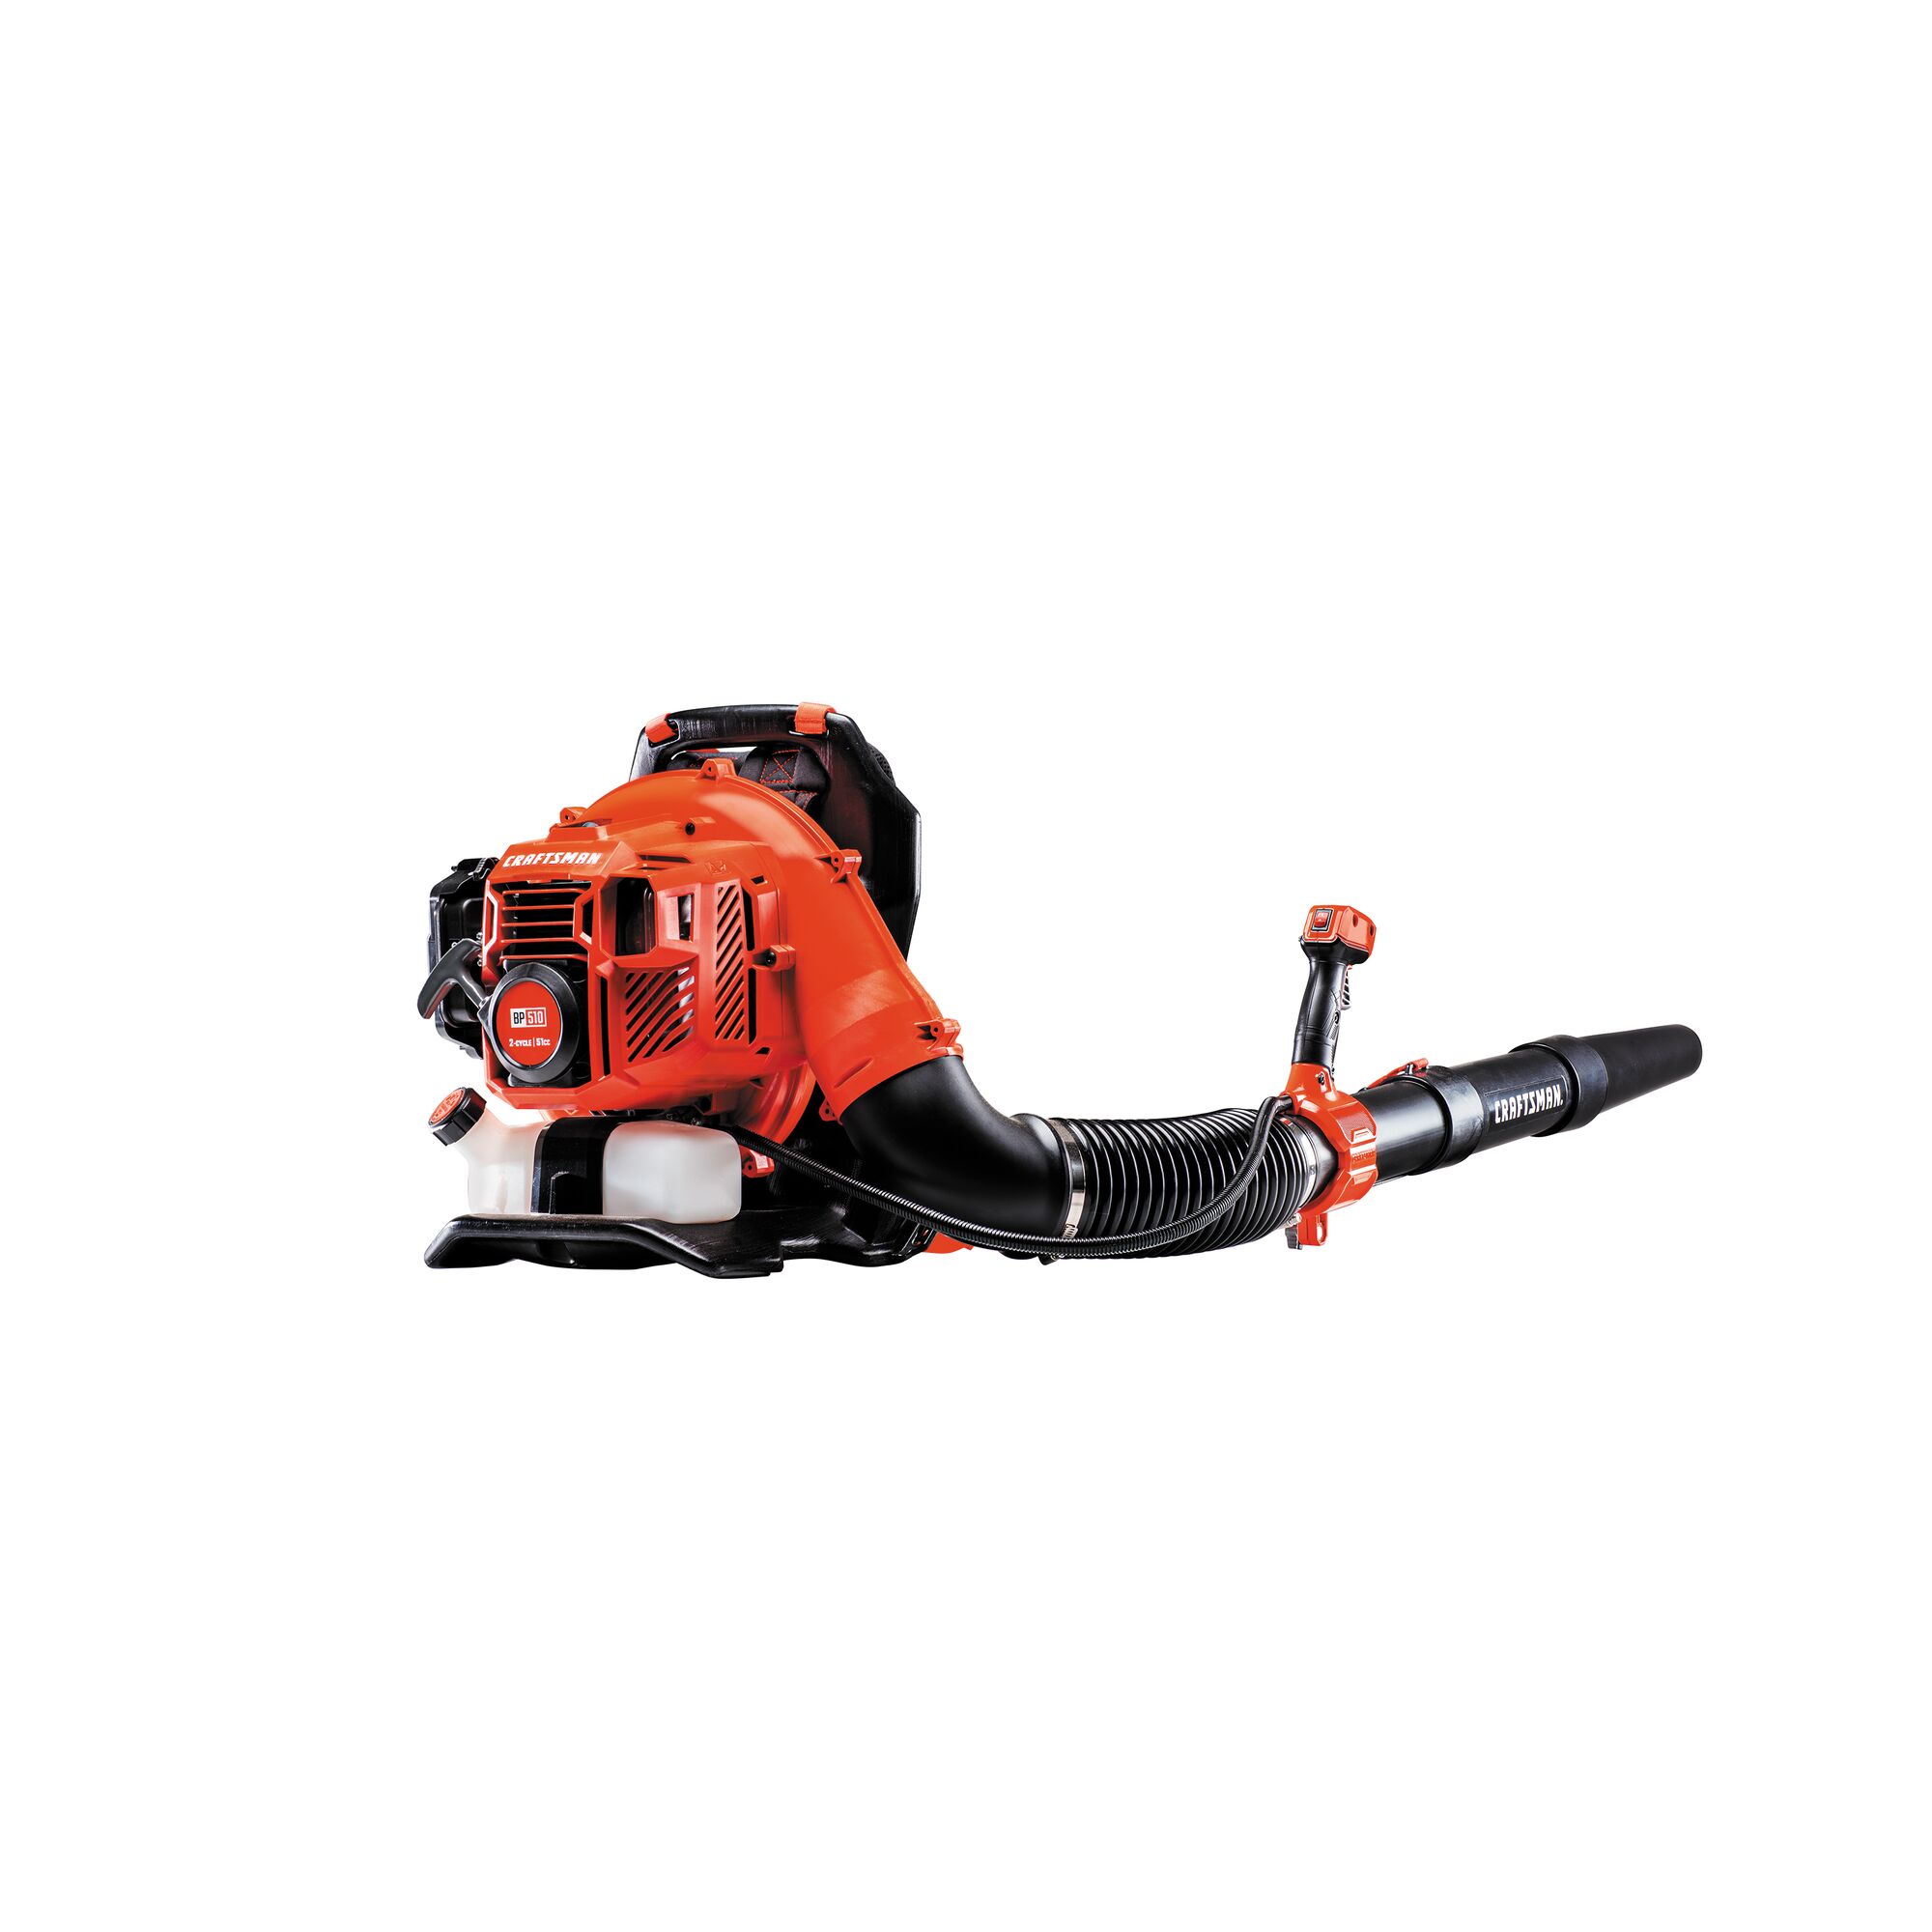 Back profile of 51 C C 2 cycle gas backpack leaf blower.